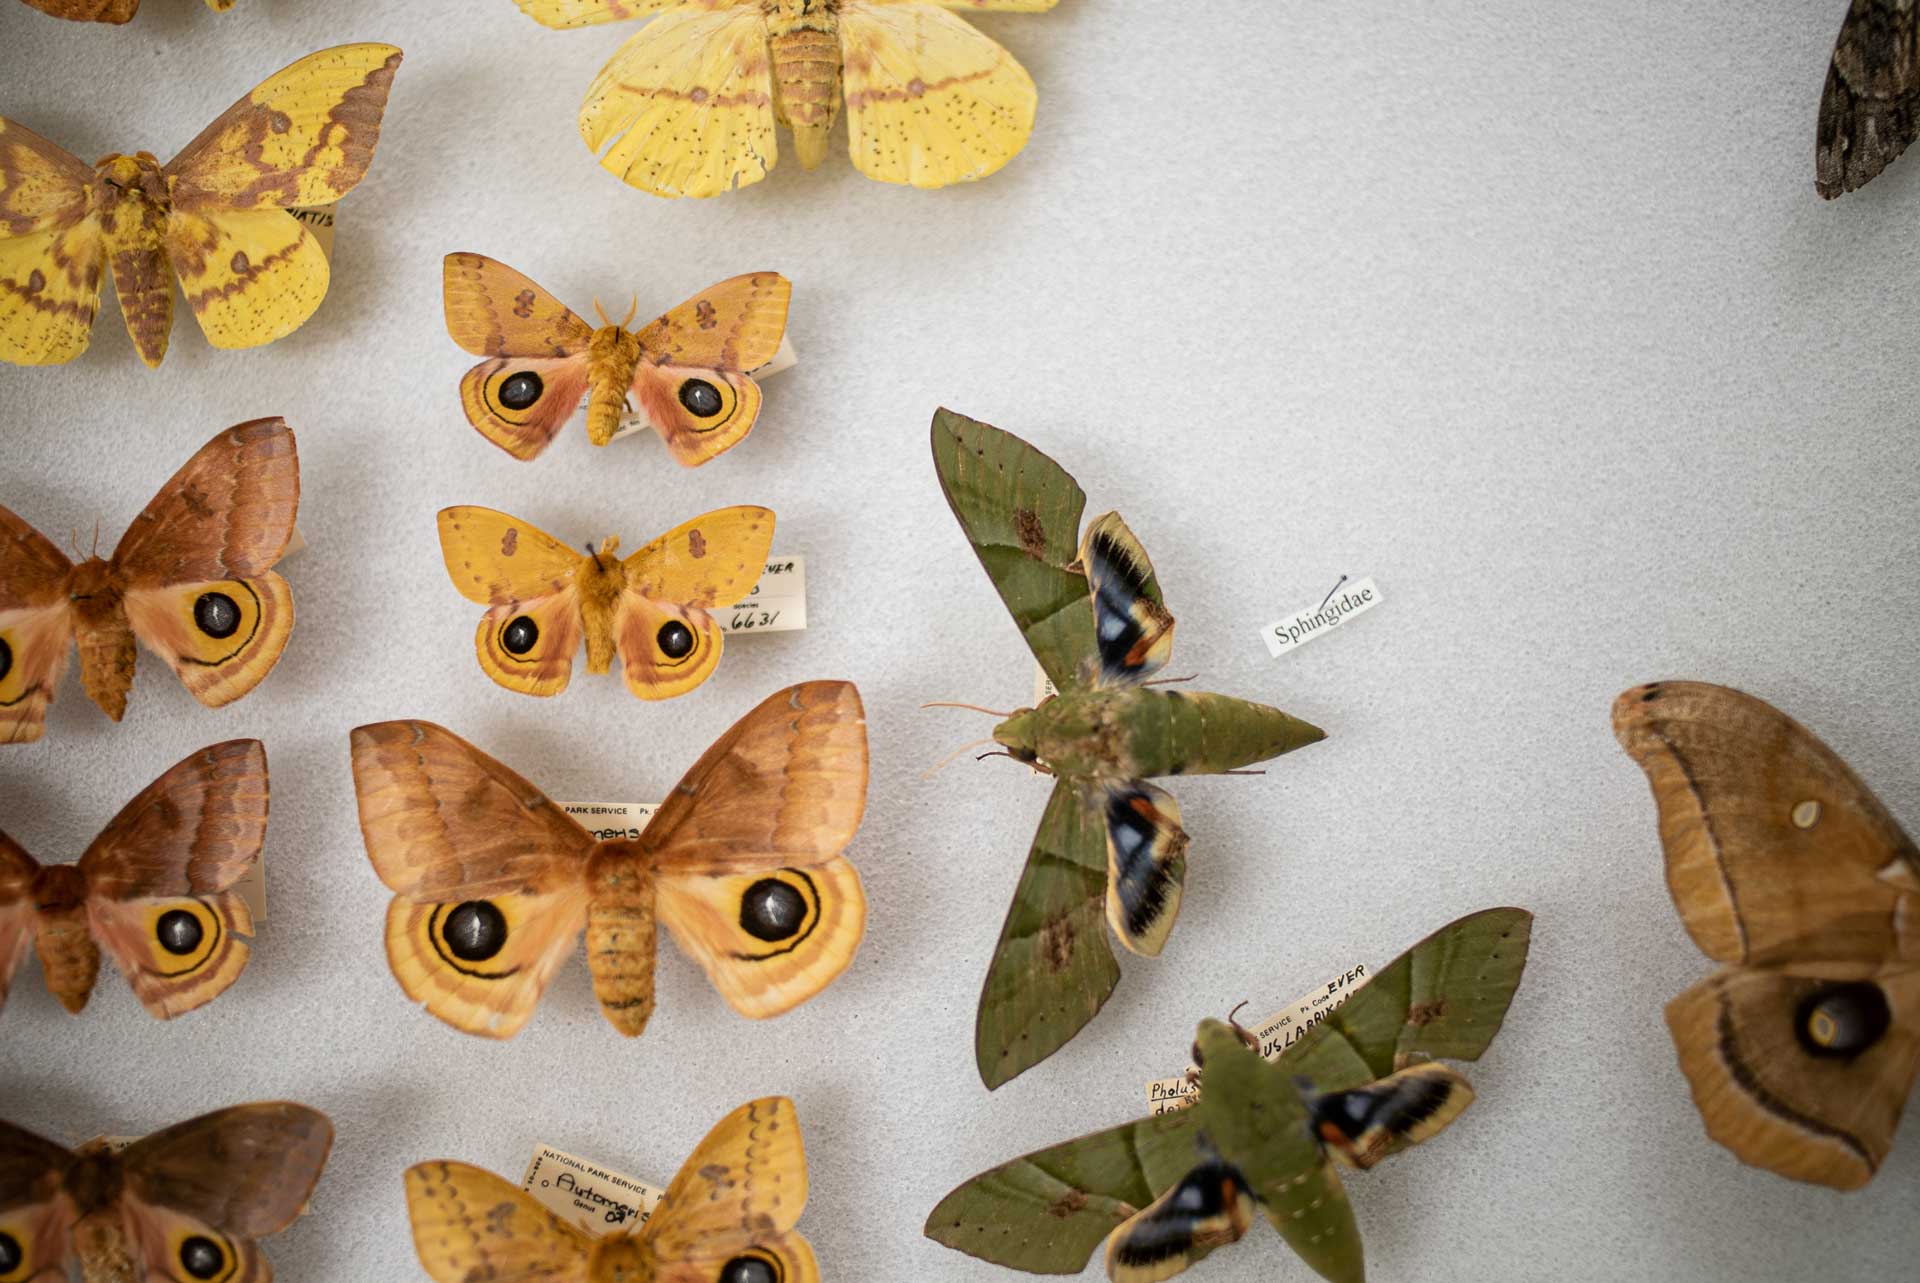 A collection of preserved moths in the Everglades archives. There are green moths, and yellow moths.